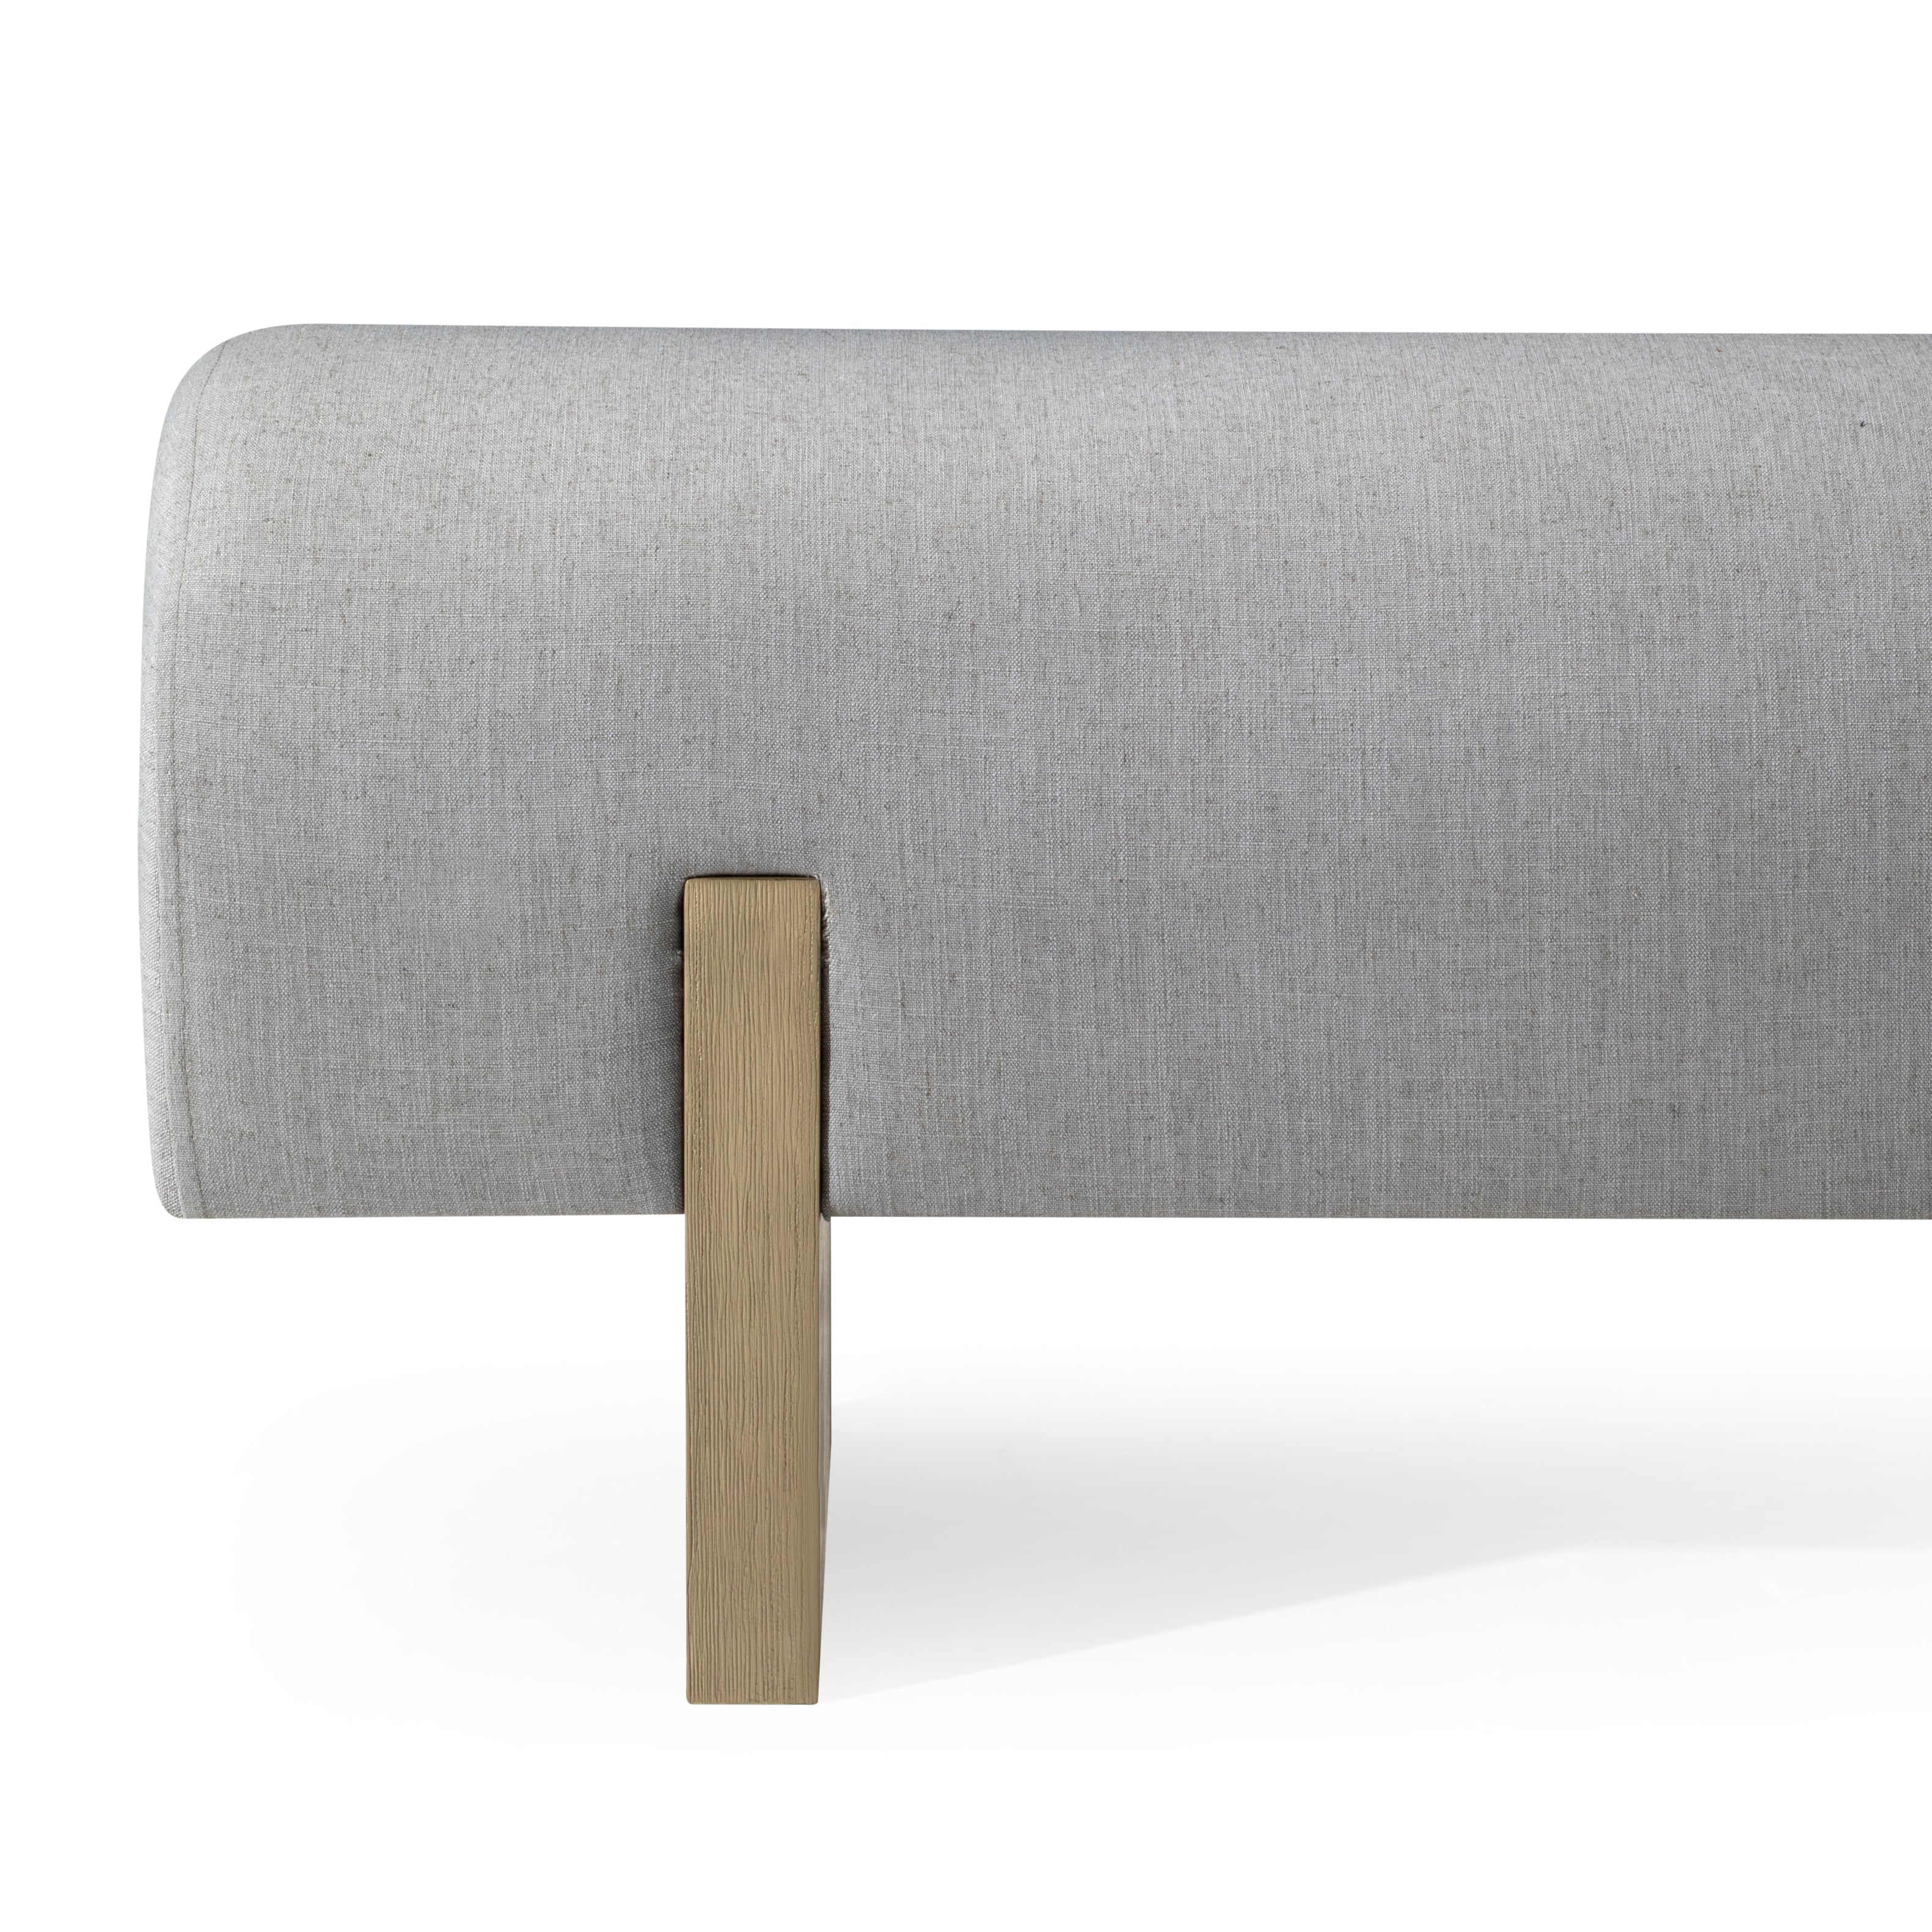 Juno Modern Upholstered Wooden Bench in Refined Grey Finish